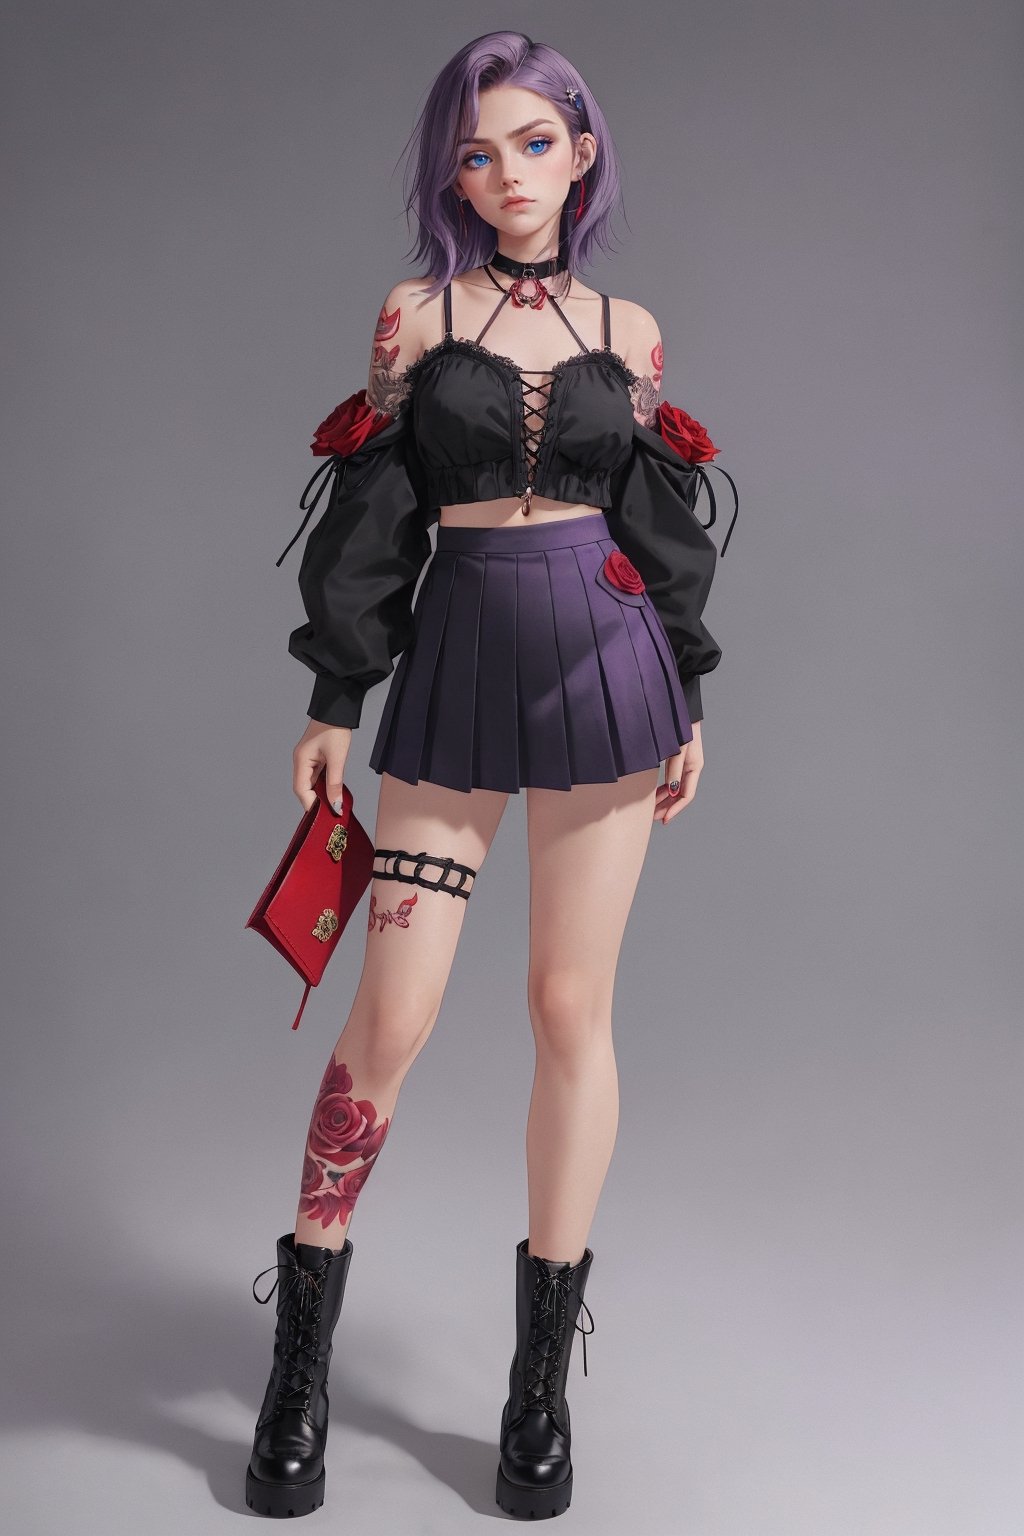 good hands, good body, 18 year old girl body,shoulder length semi wavy short straight purple hair,a red rose tattoo on the neck,letter tattoos on the fingers of the hand, chunky_lace_up_boots_black,pocket lining pleated tailored mini skirt in black, full_body,whole body